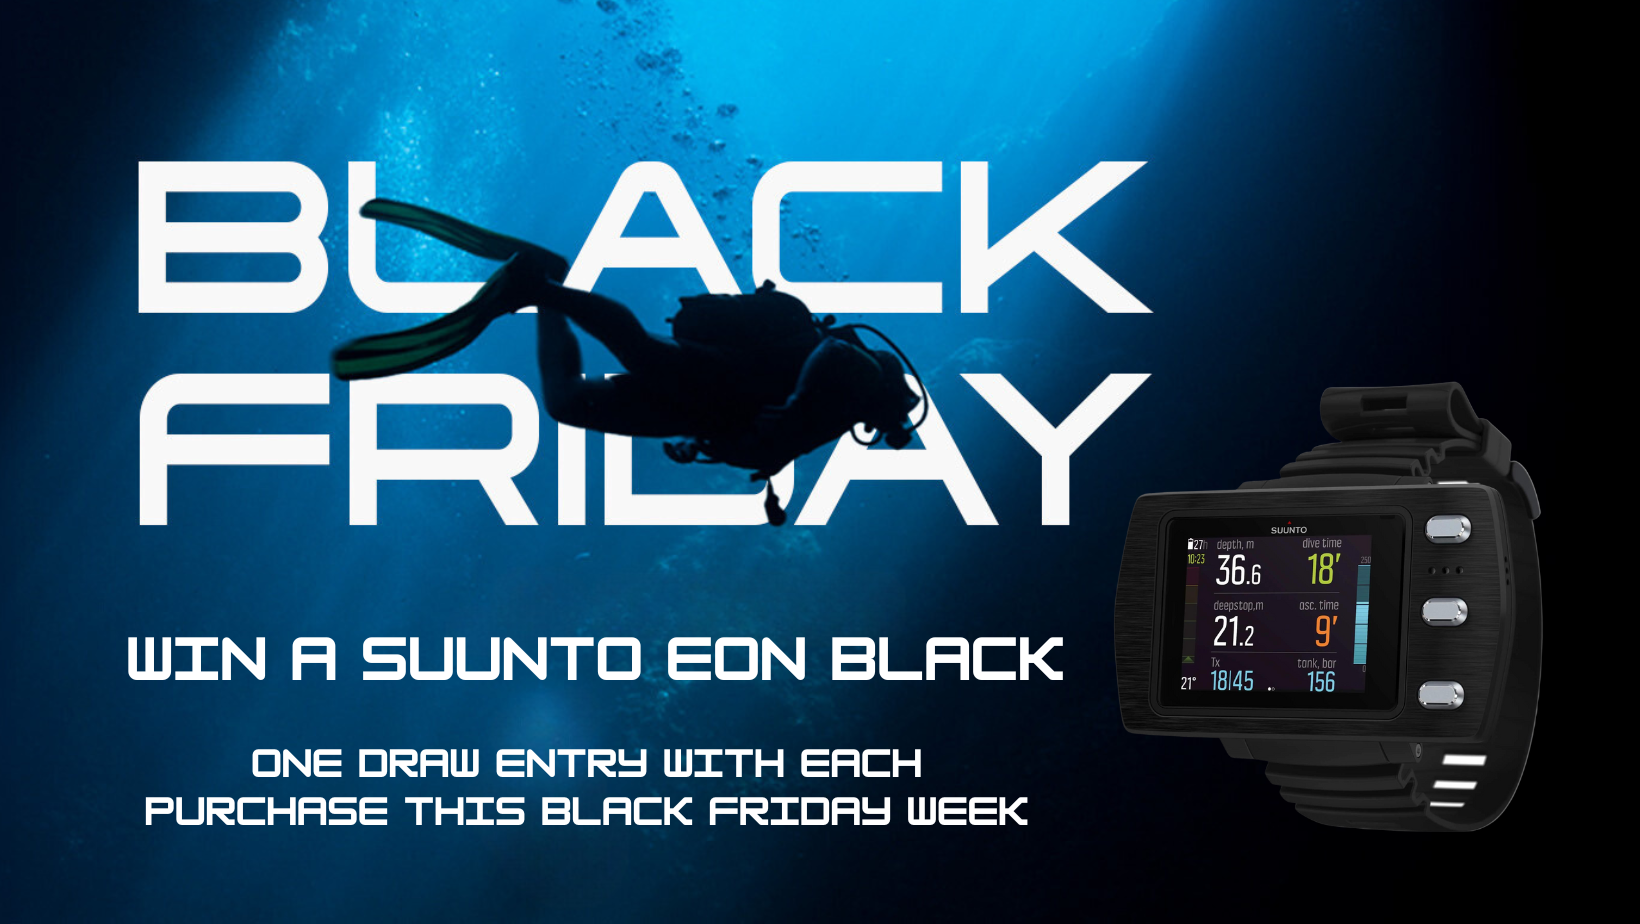 Don't Miss Out On Amazing Deals this Black Friday